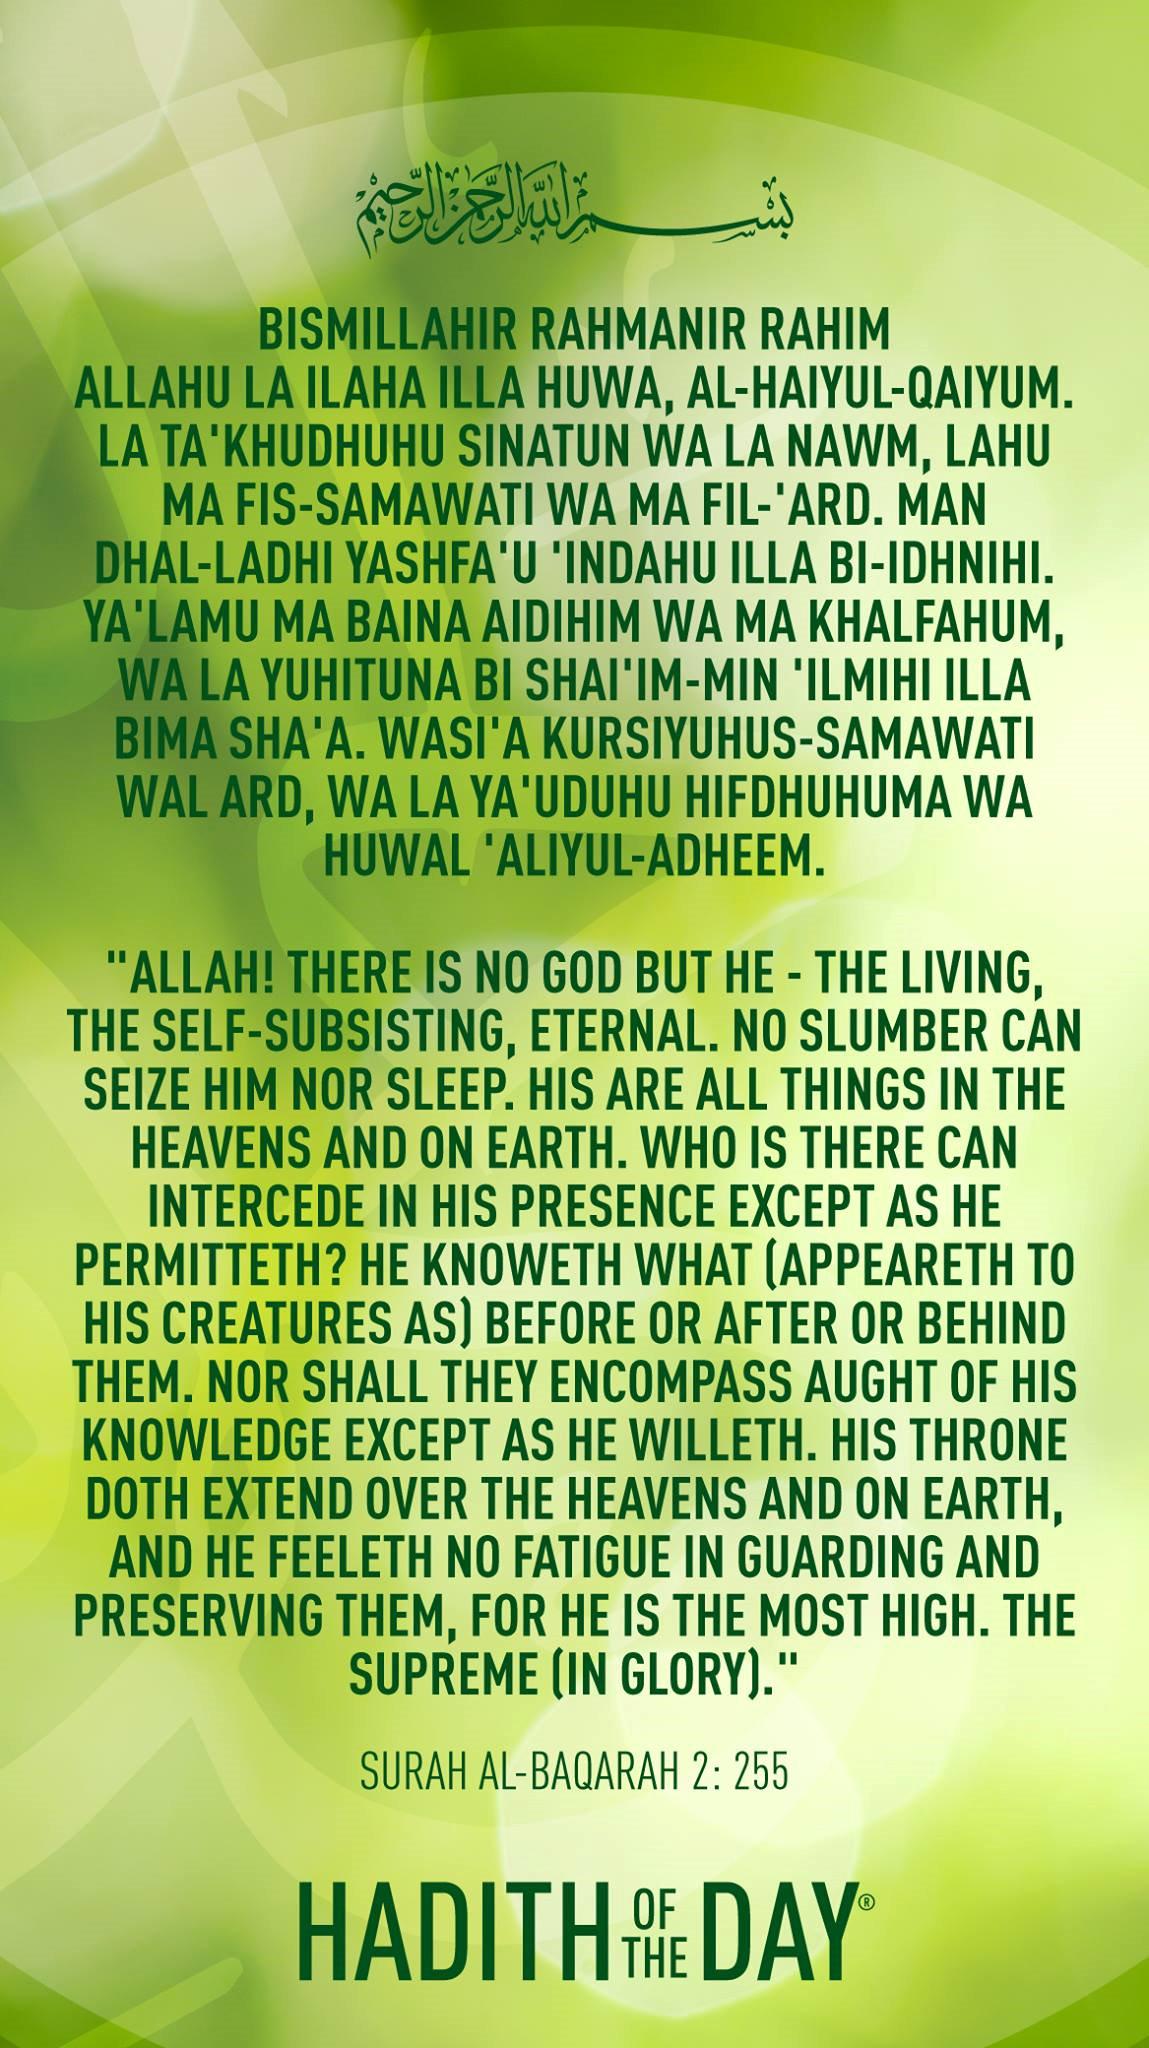 Hadith of the Day on Twitter: "Download HOTD's phone wallpaper with